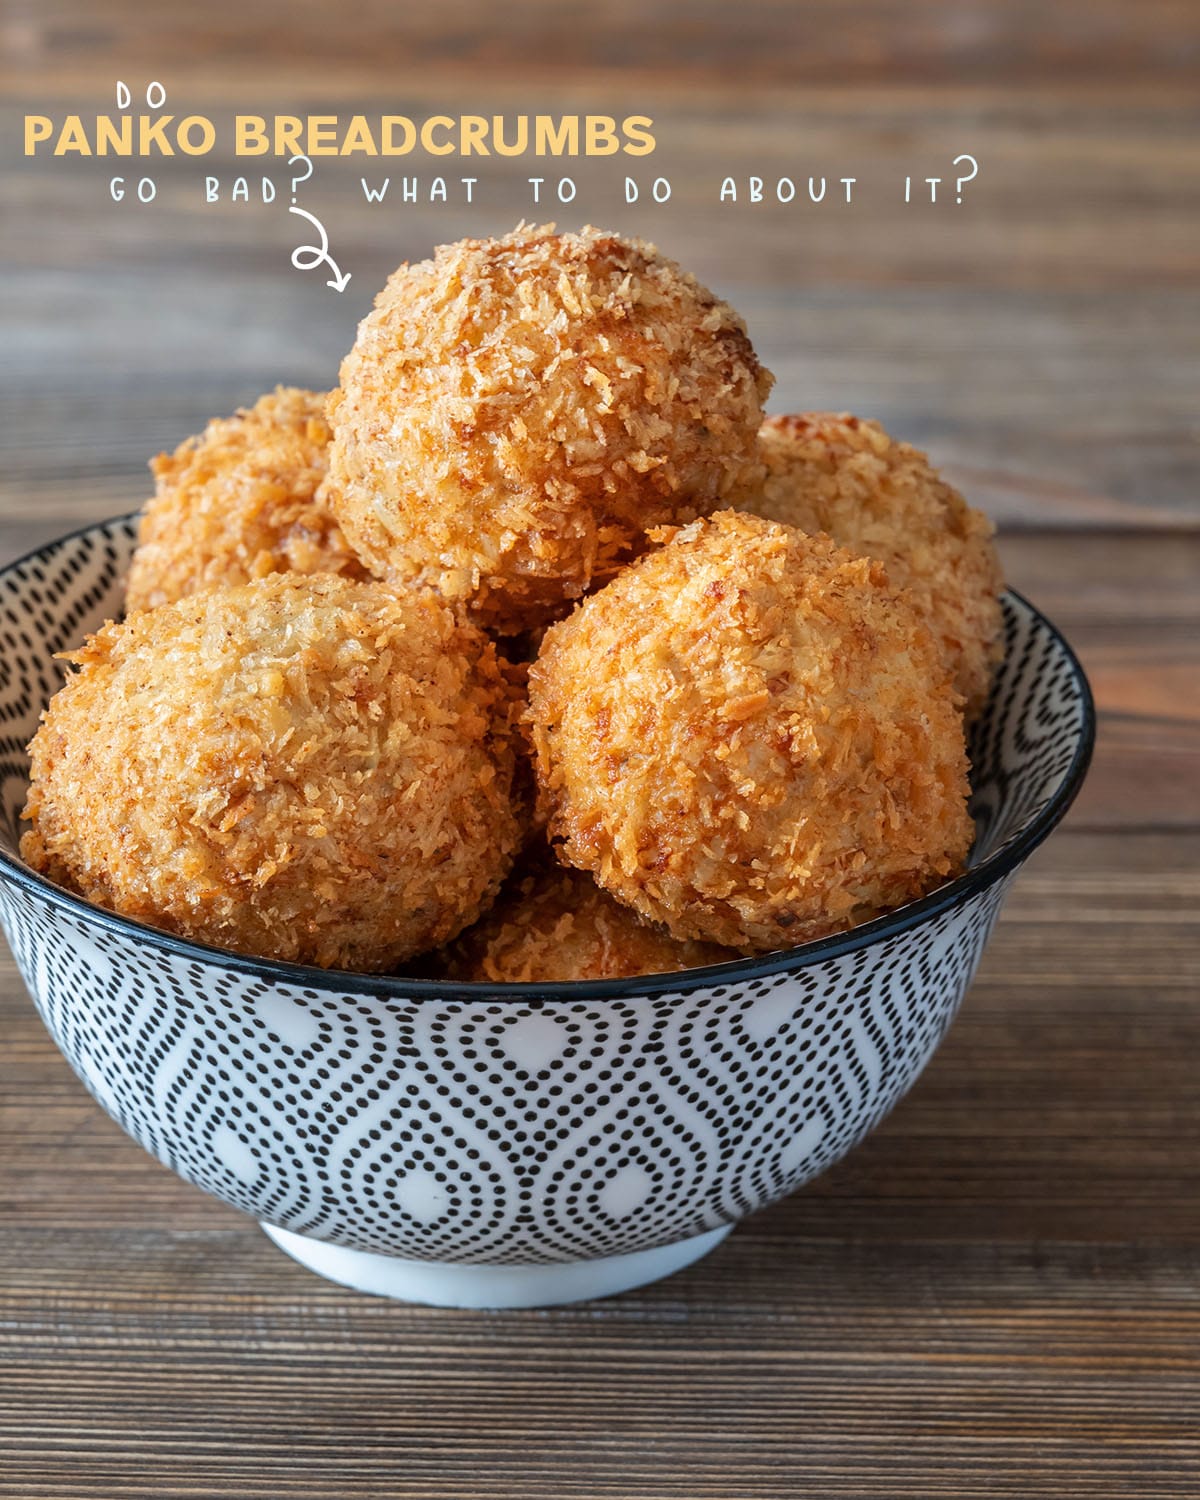 If your panko breadcrumbs are starting to look dry or feel hard, they are getting stale. This is not harmful to eat, but it will affect the taste and texture of your dish.